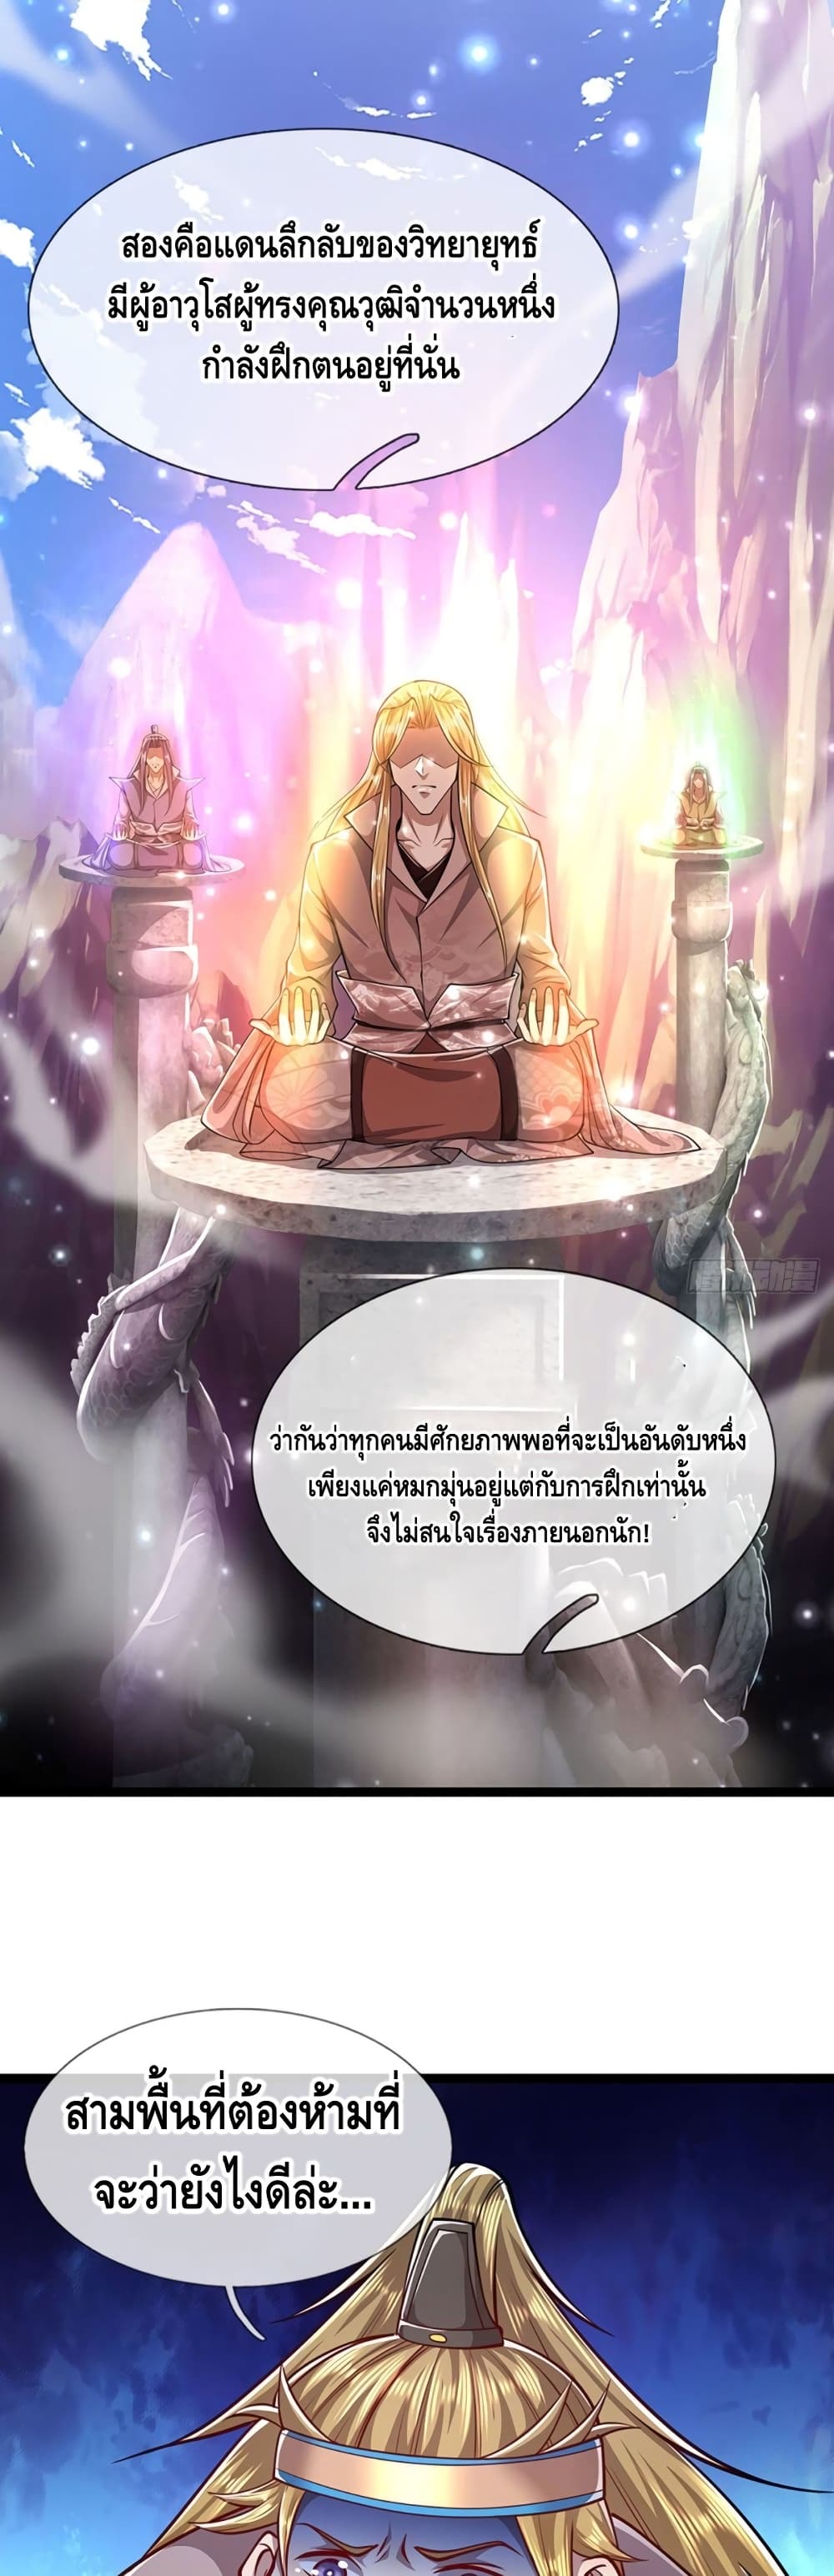 Disciples All Over the World à¸à¸­à¸à¸à¸µà¹ 52 (5)